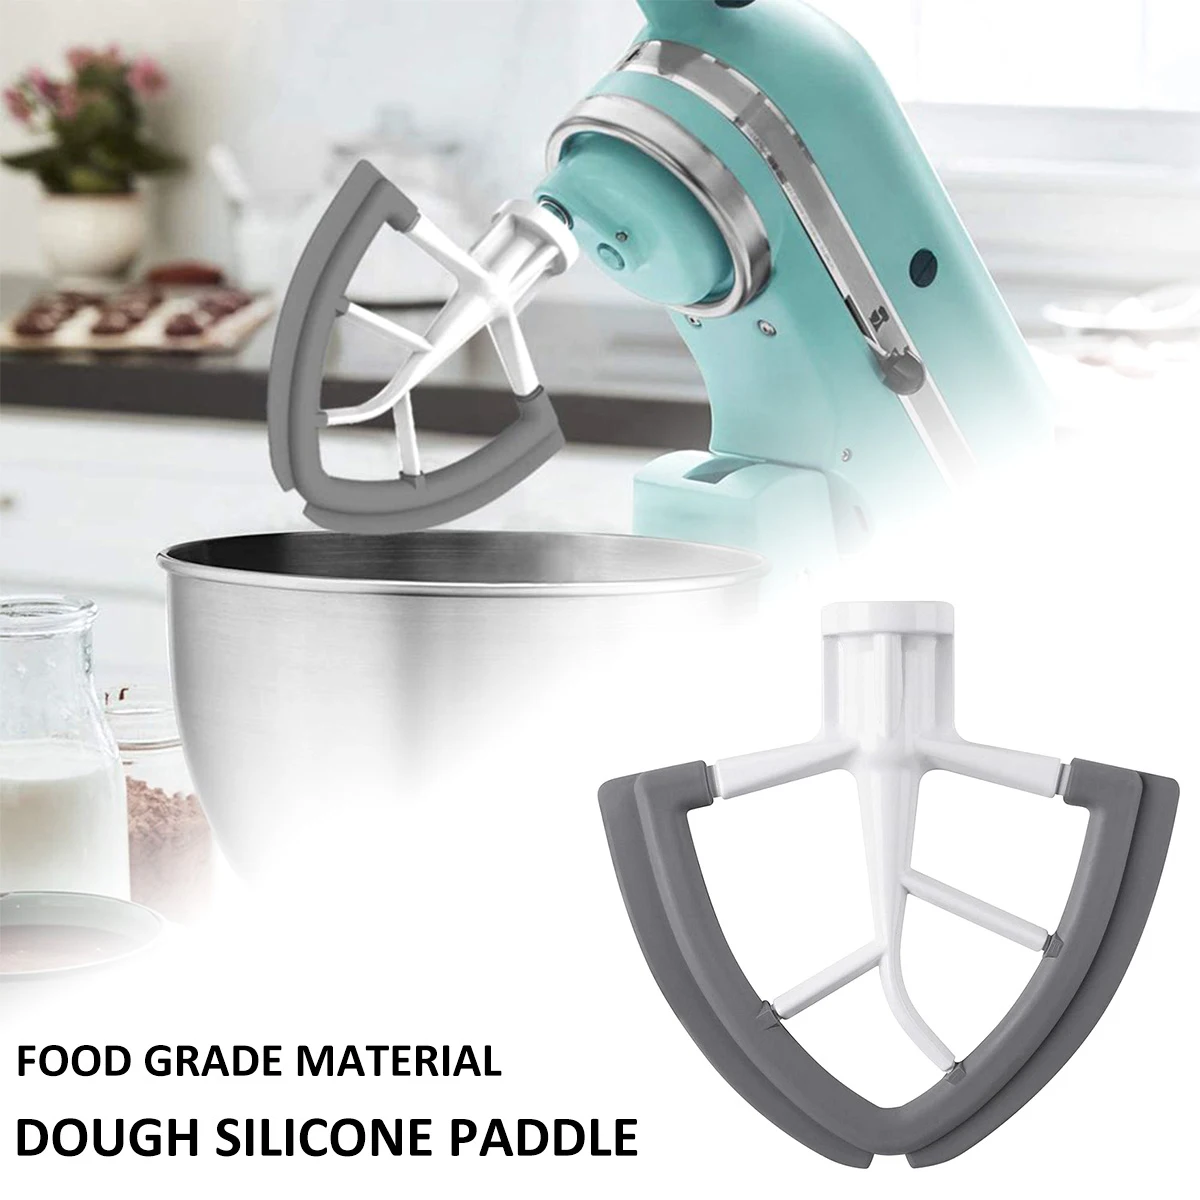 https://ae01.alicdn.com/kf/S58cbc5bd7dd140fea8982f8d07602d899/4-5-5QT-Flex-Edge-Beater-Silicone-Mixer-Paddle-For-Kitchenaid-Tilt-head-Stand-Mixing-Replacement.jpg